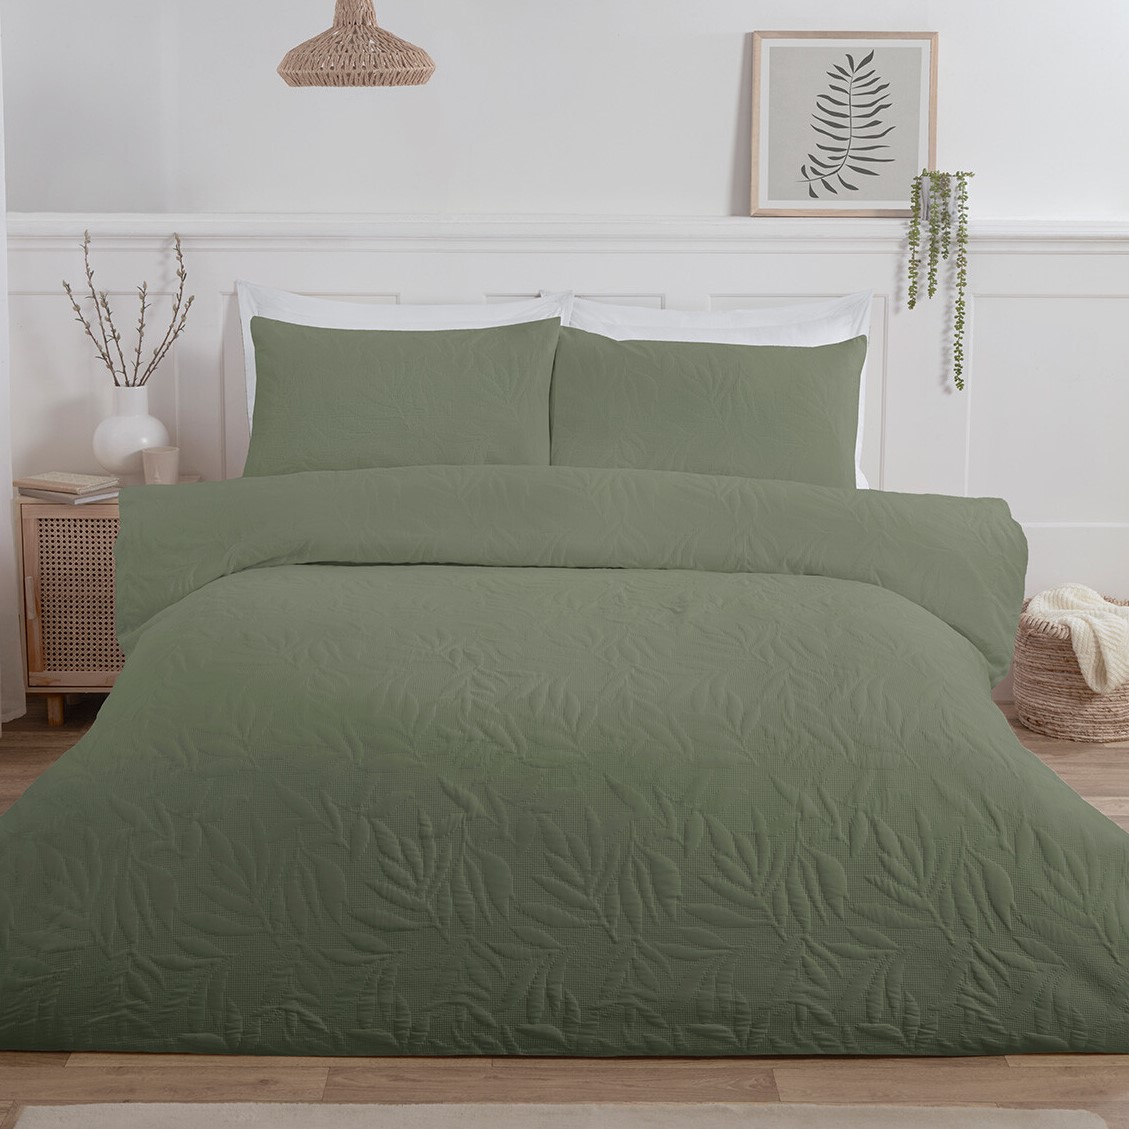 Avery Leaf Duvet Cover and Pillowcase Set - Olive Green / Superking Image 1